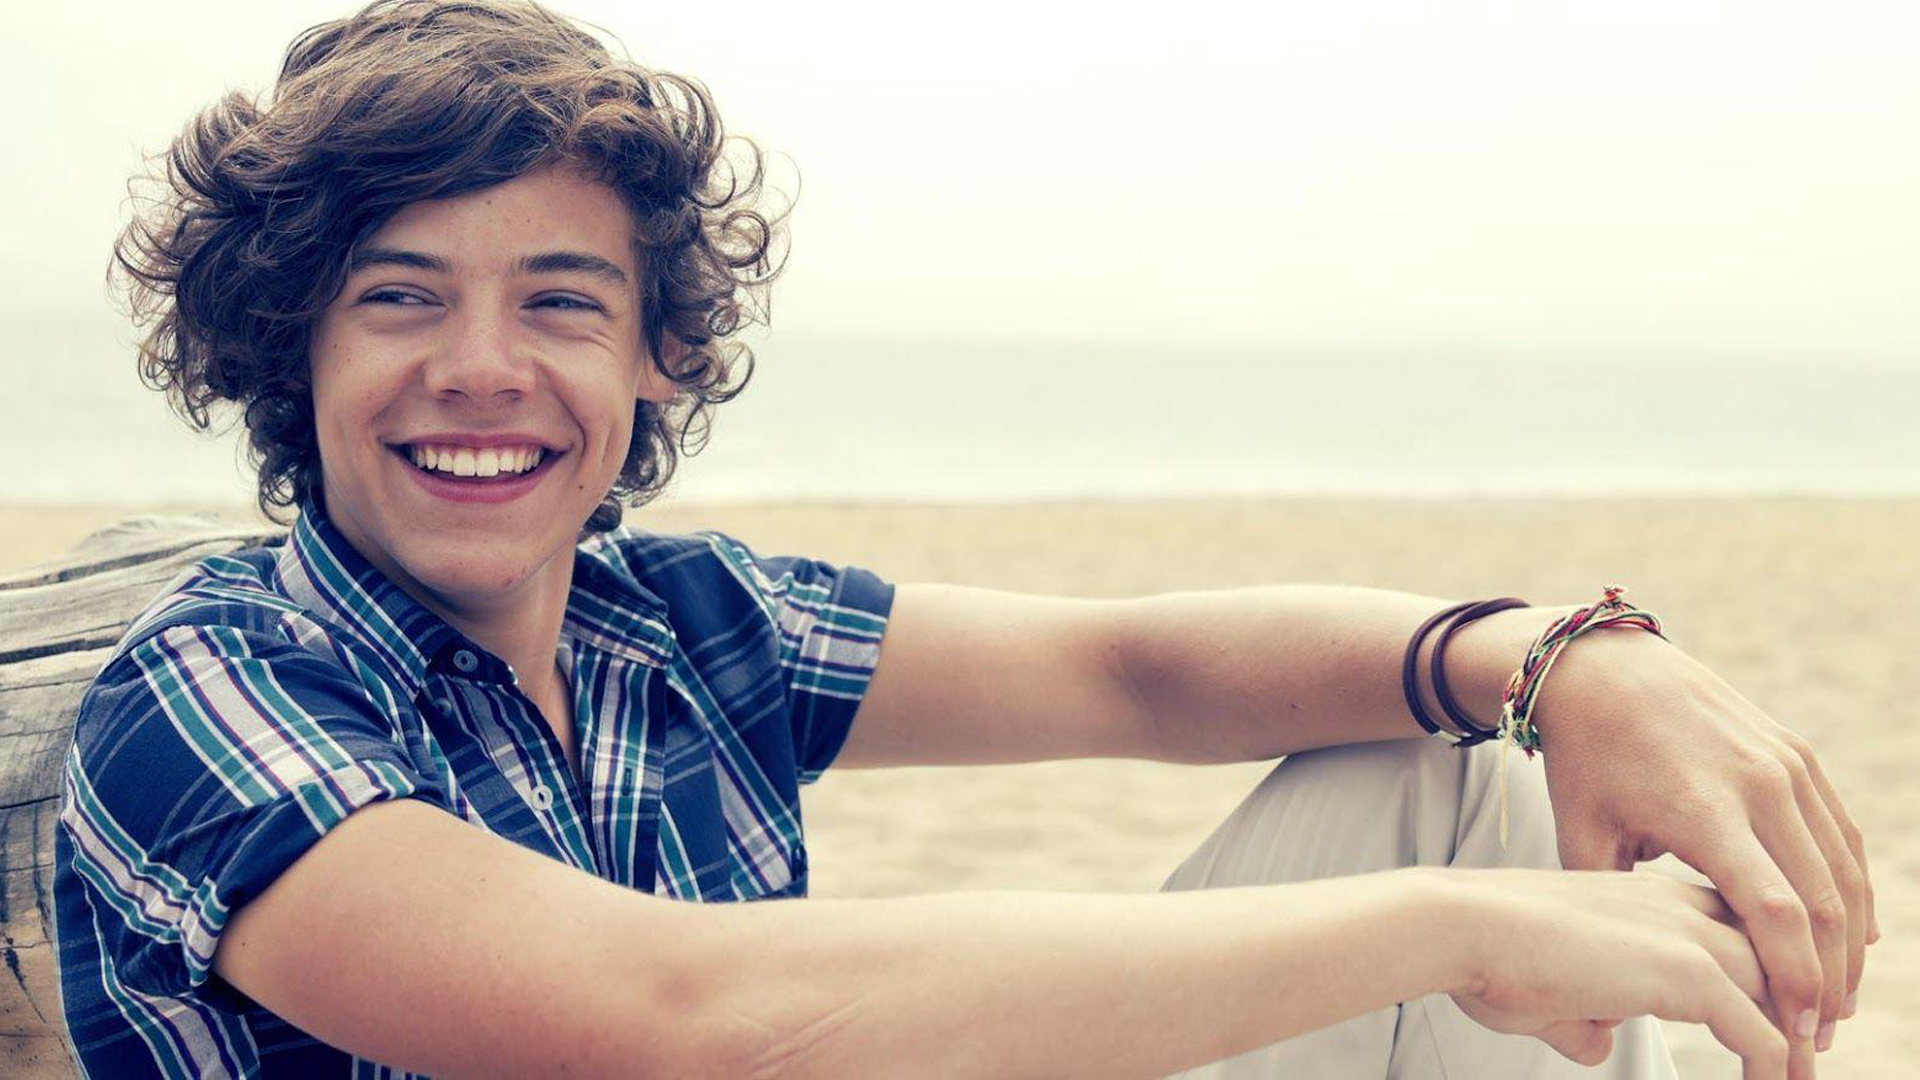 Harry Styles® | Harry styles wallpaper, Harry styles pictures, Harry styles  photos